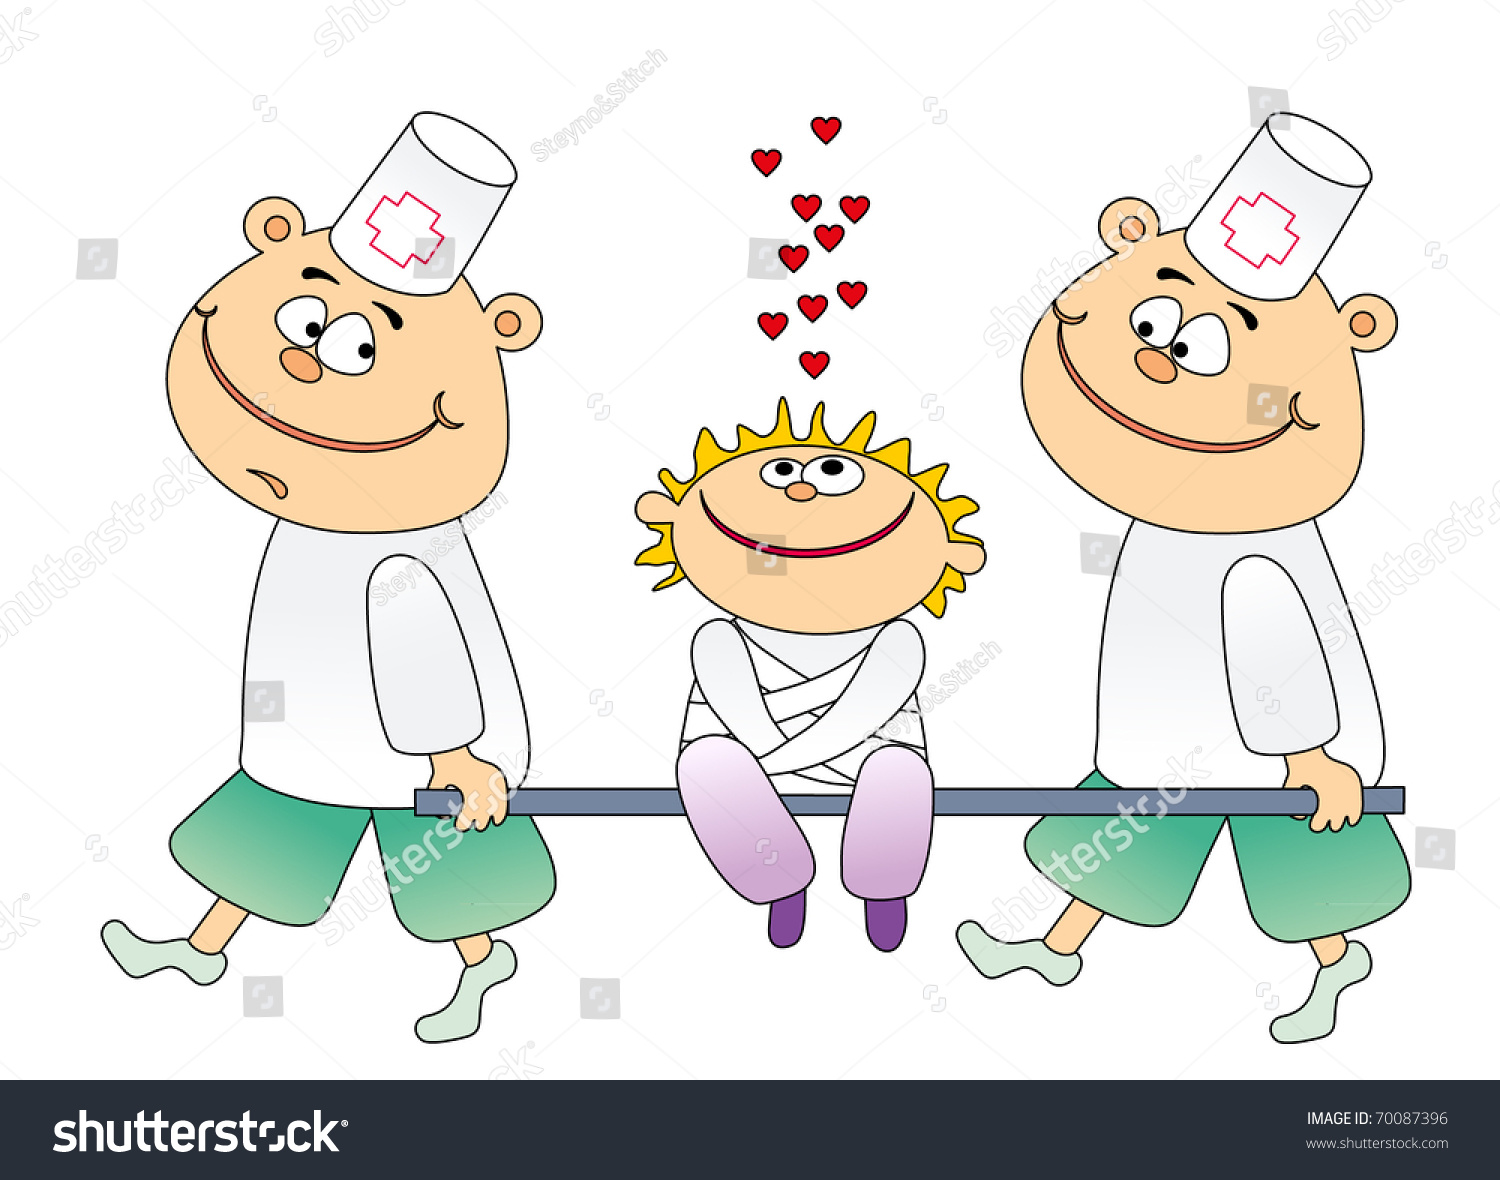 Vector Illustration. Happy Patient And Two Doctors - 70087396